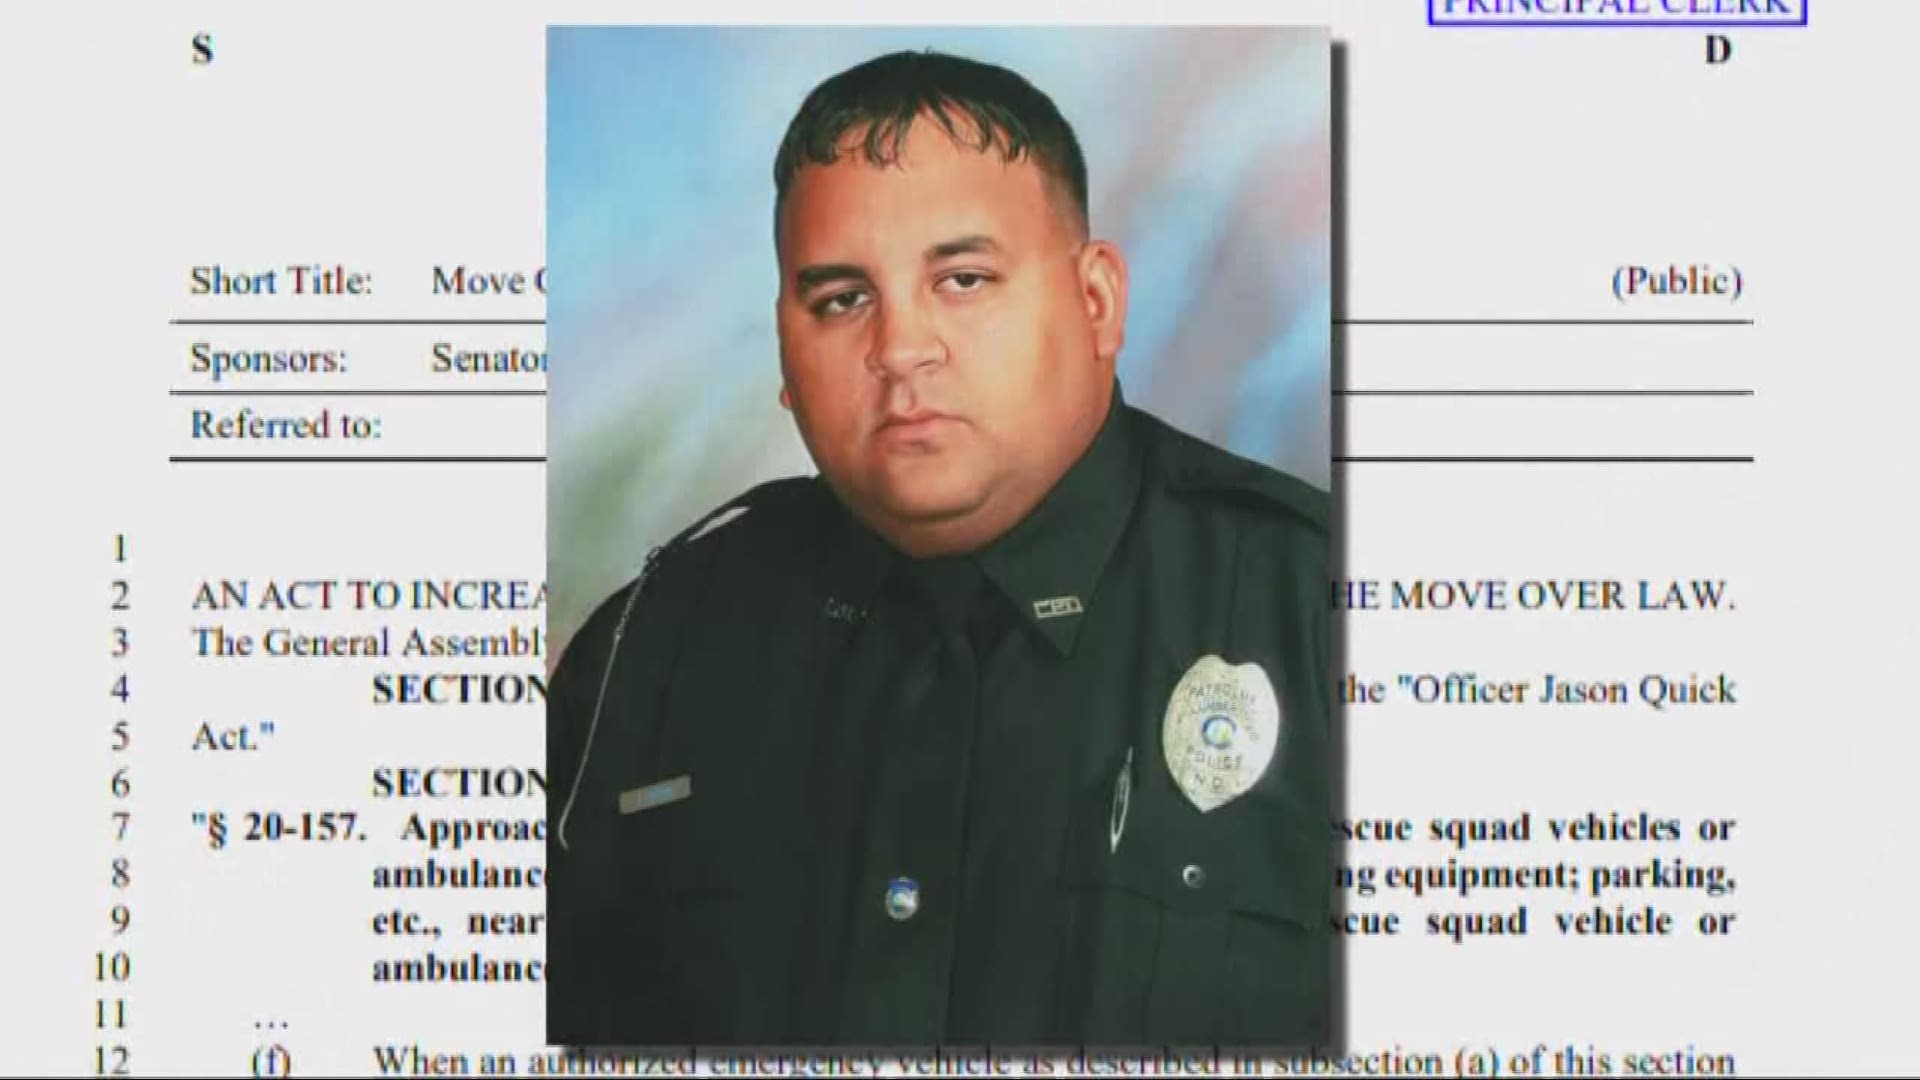 In December, Officer Quick was investigating a car crash when he was hit and killed by a passing car. His grief-stricken widow started advocating for an increase in penalties for the 'Move Over' law.